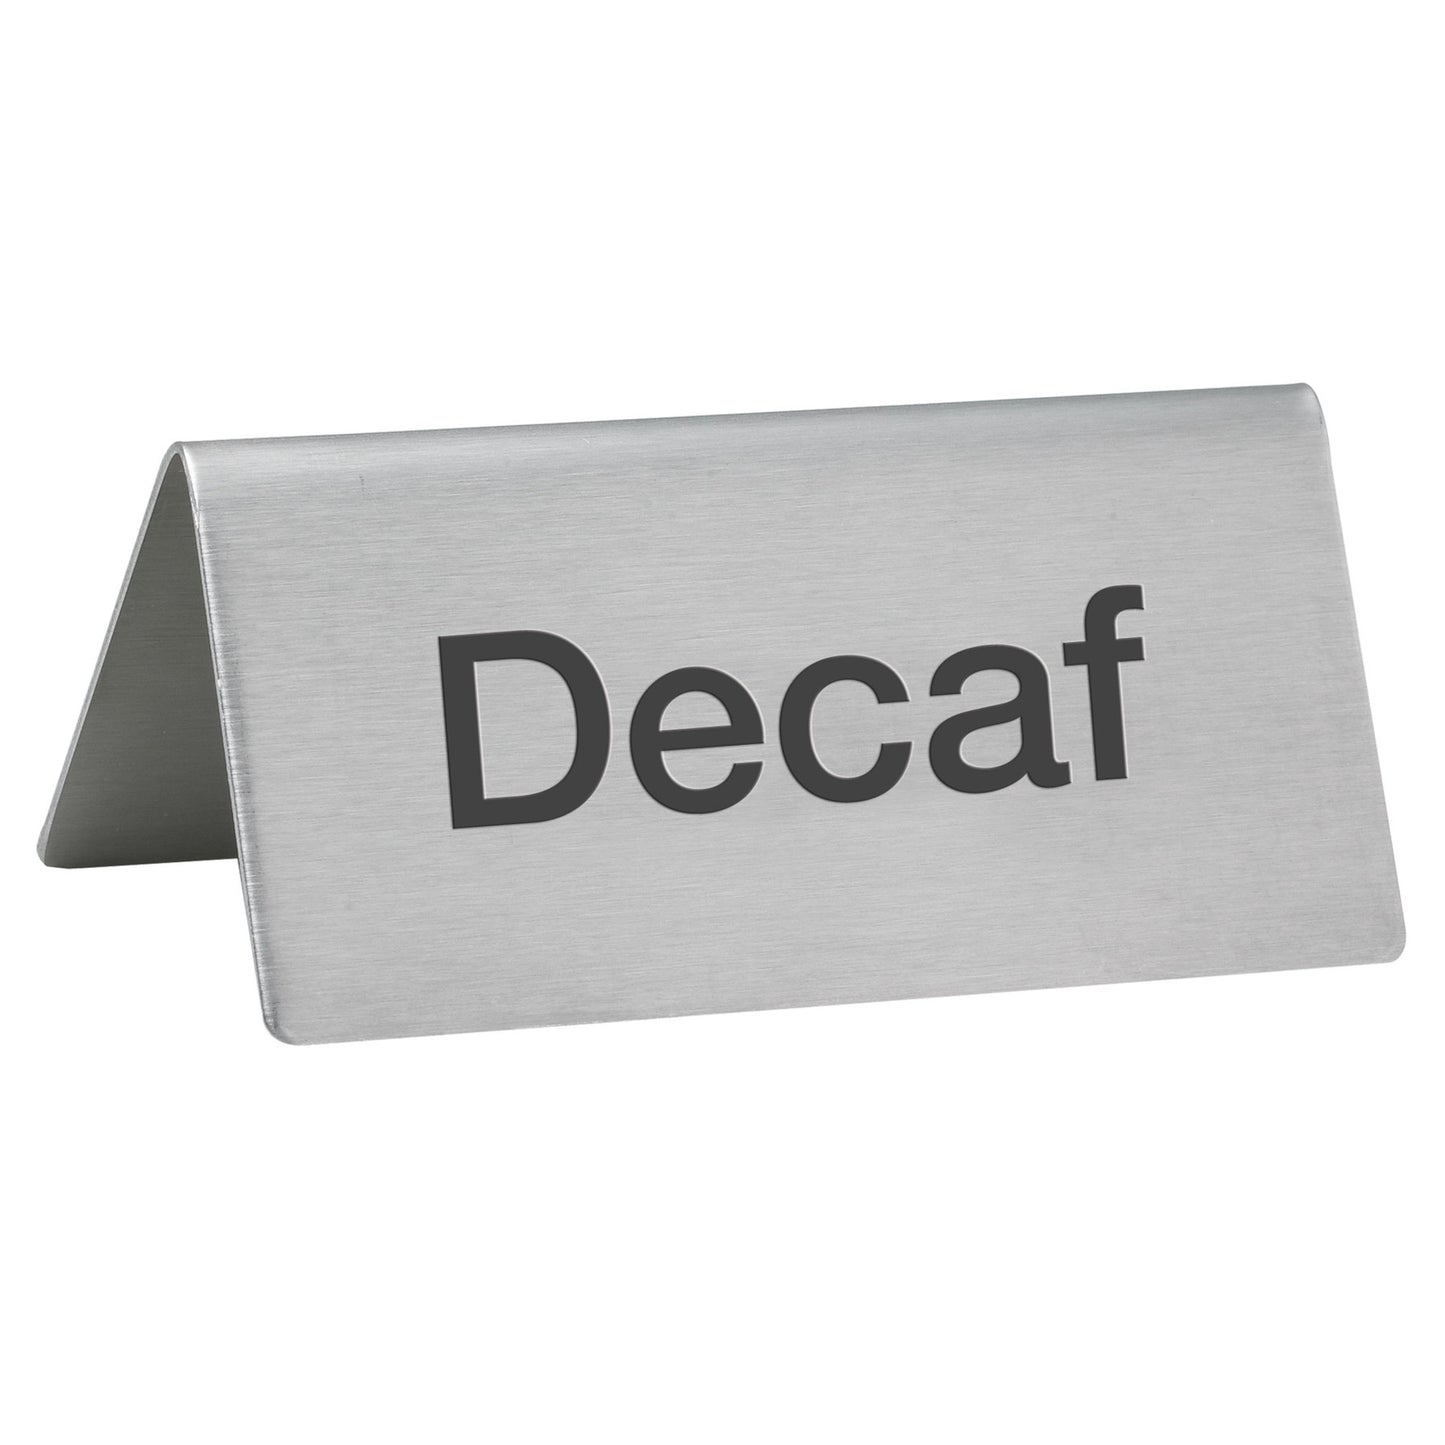 SGN-102 - Tent Sign, Stainless Steel - Decaf